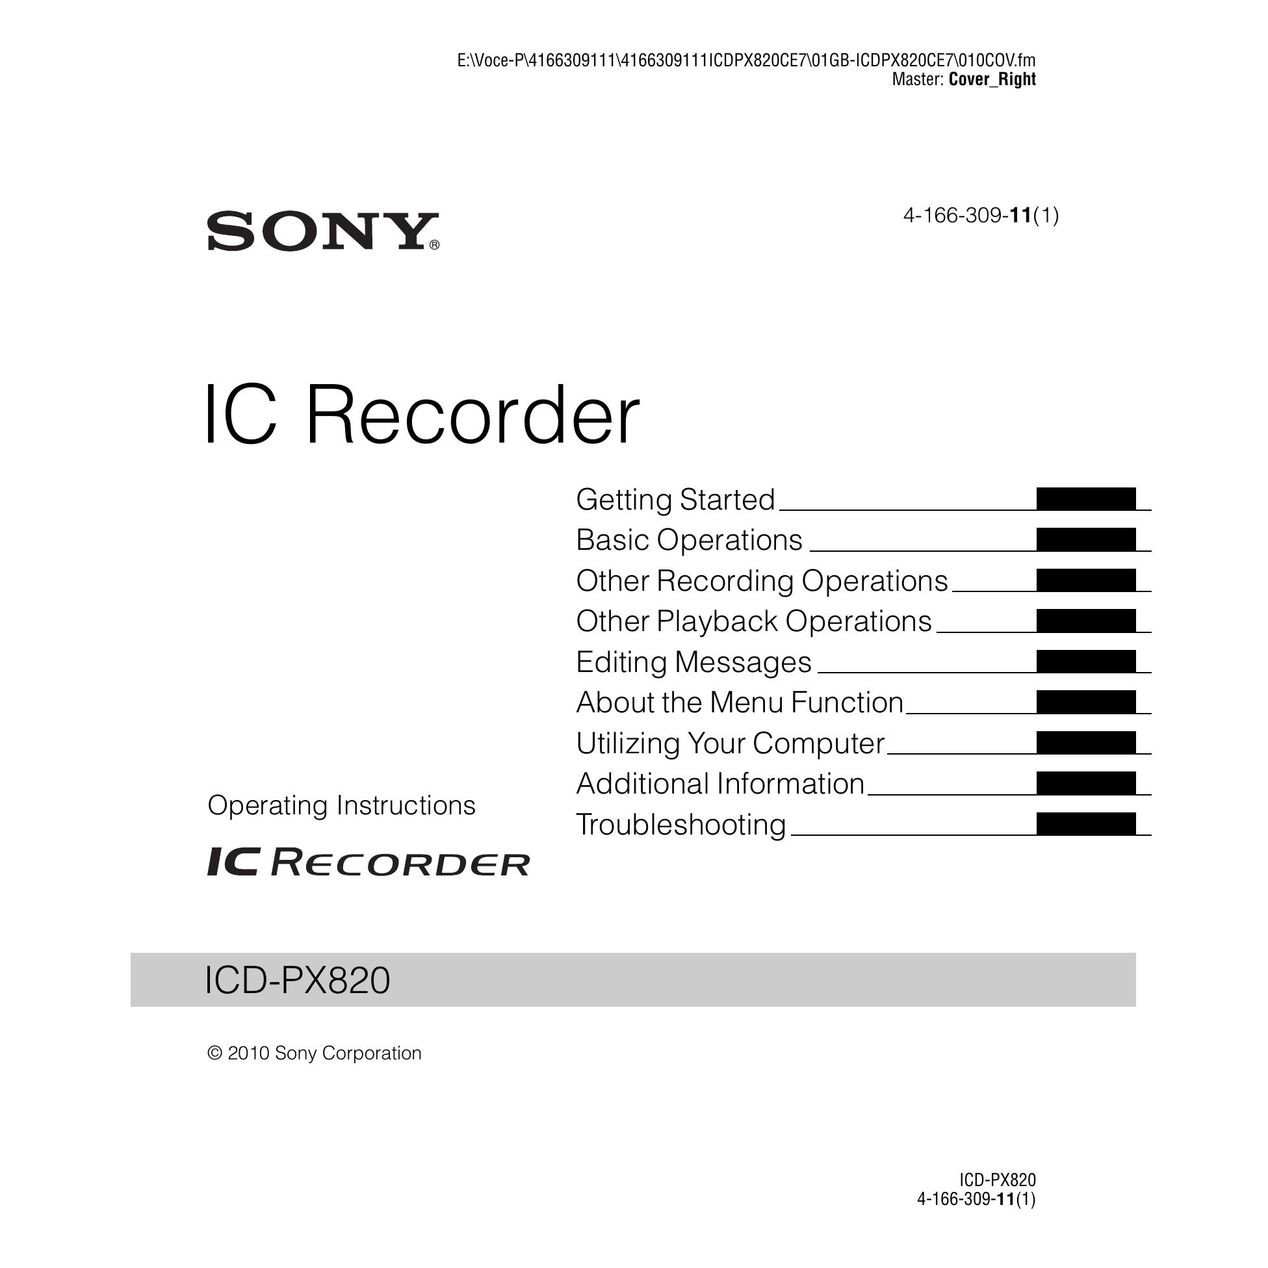 Sony 4-166-309-11(1) Microcassette Recorder User Manual